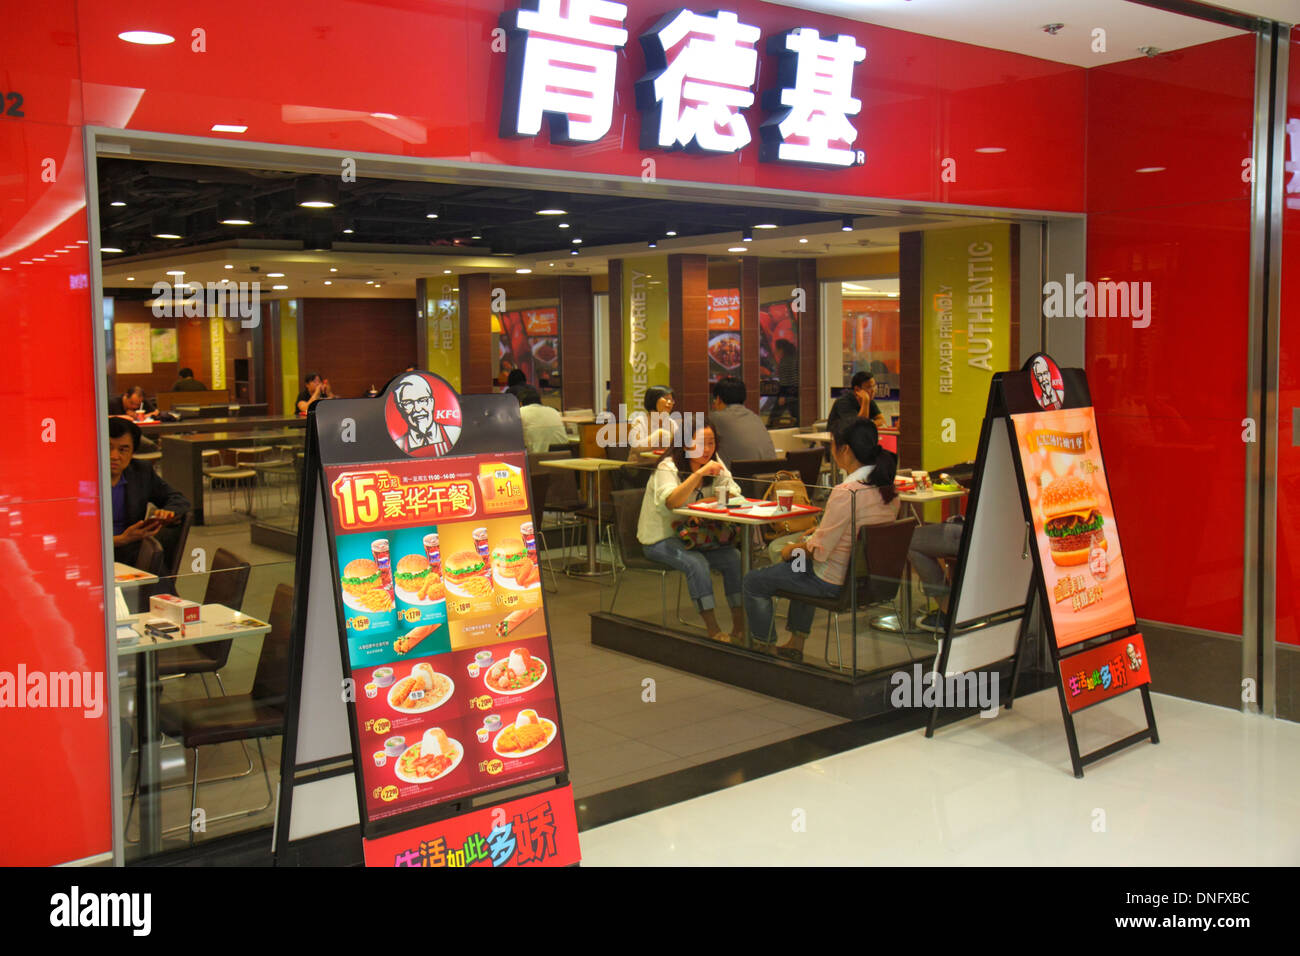 Beijing China,Chinese,The Malls at Oriental Plaza,KFC,fast food,Chinese characters hànzì pinyin,restaurant restaurants food dining cafe cafes,cuisine, Stock Photo